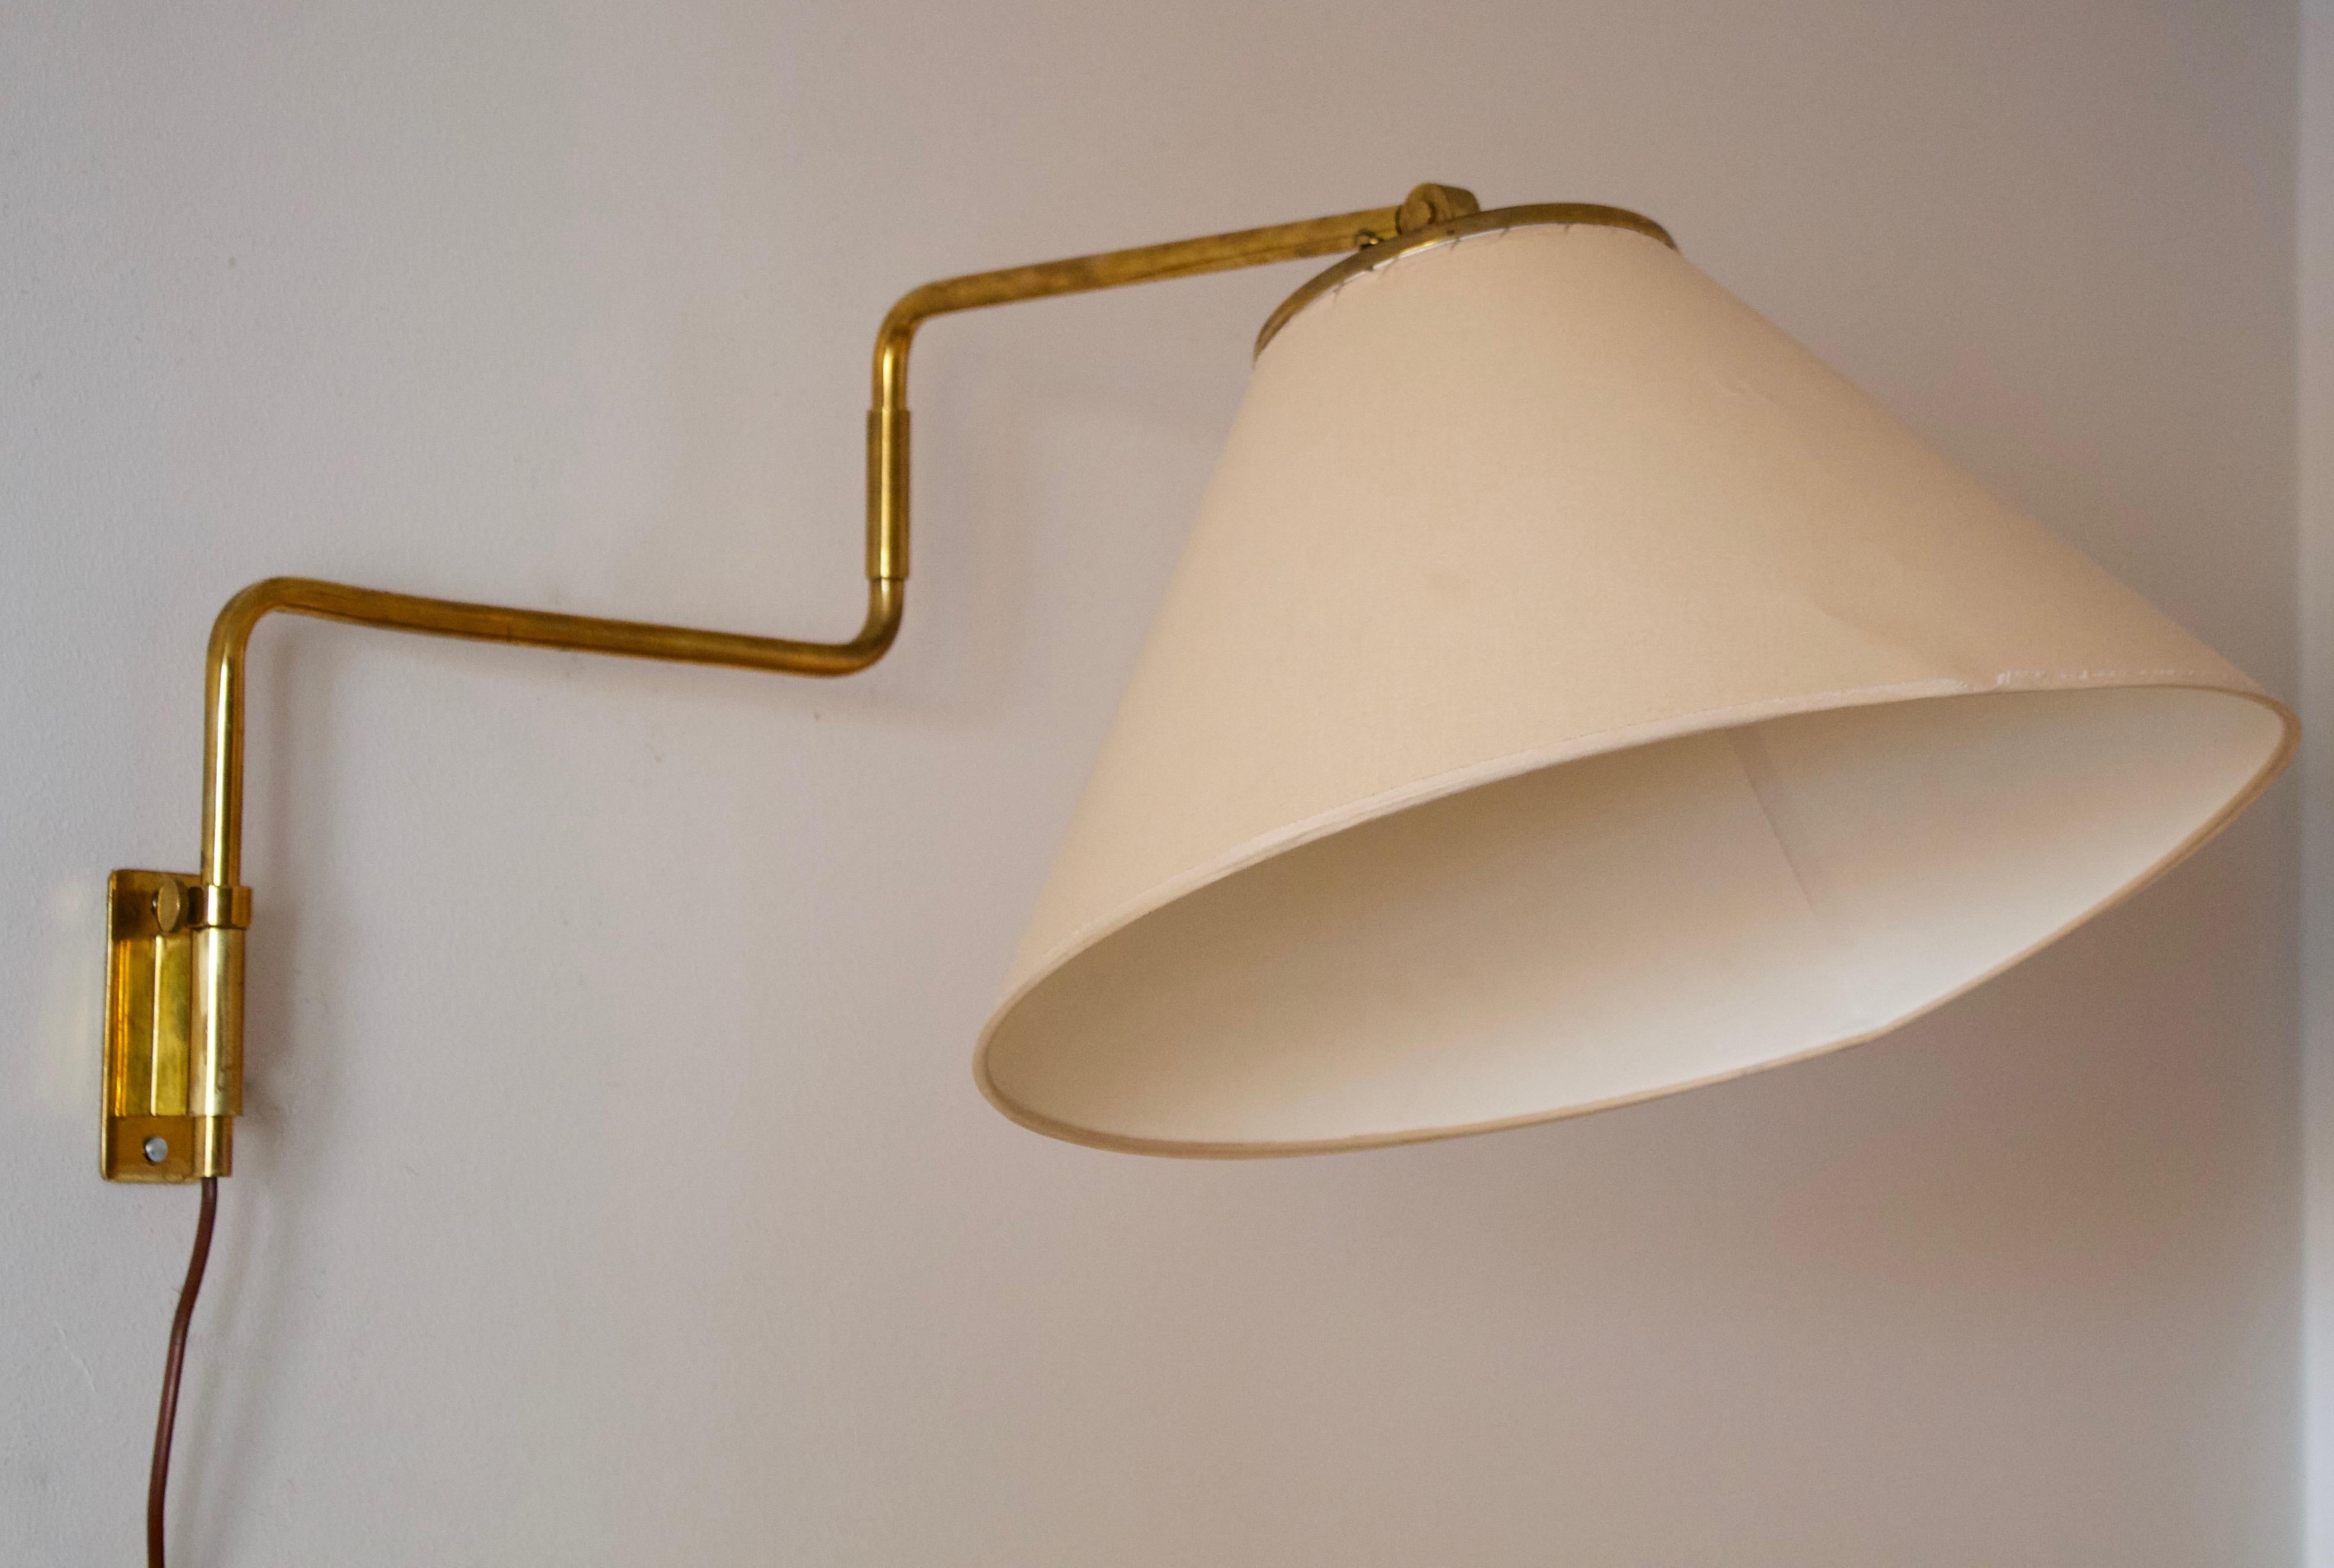 An adjustable wall light / task light. Model 9414, designed by Paavo Tynell for his own firm Taito OY, Finland, 1950s.